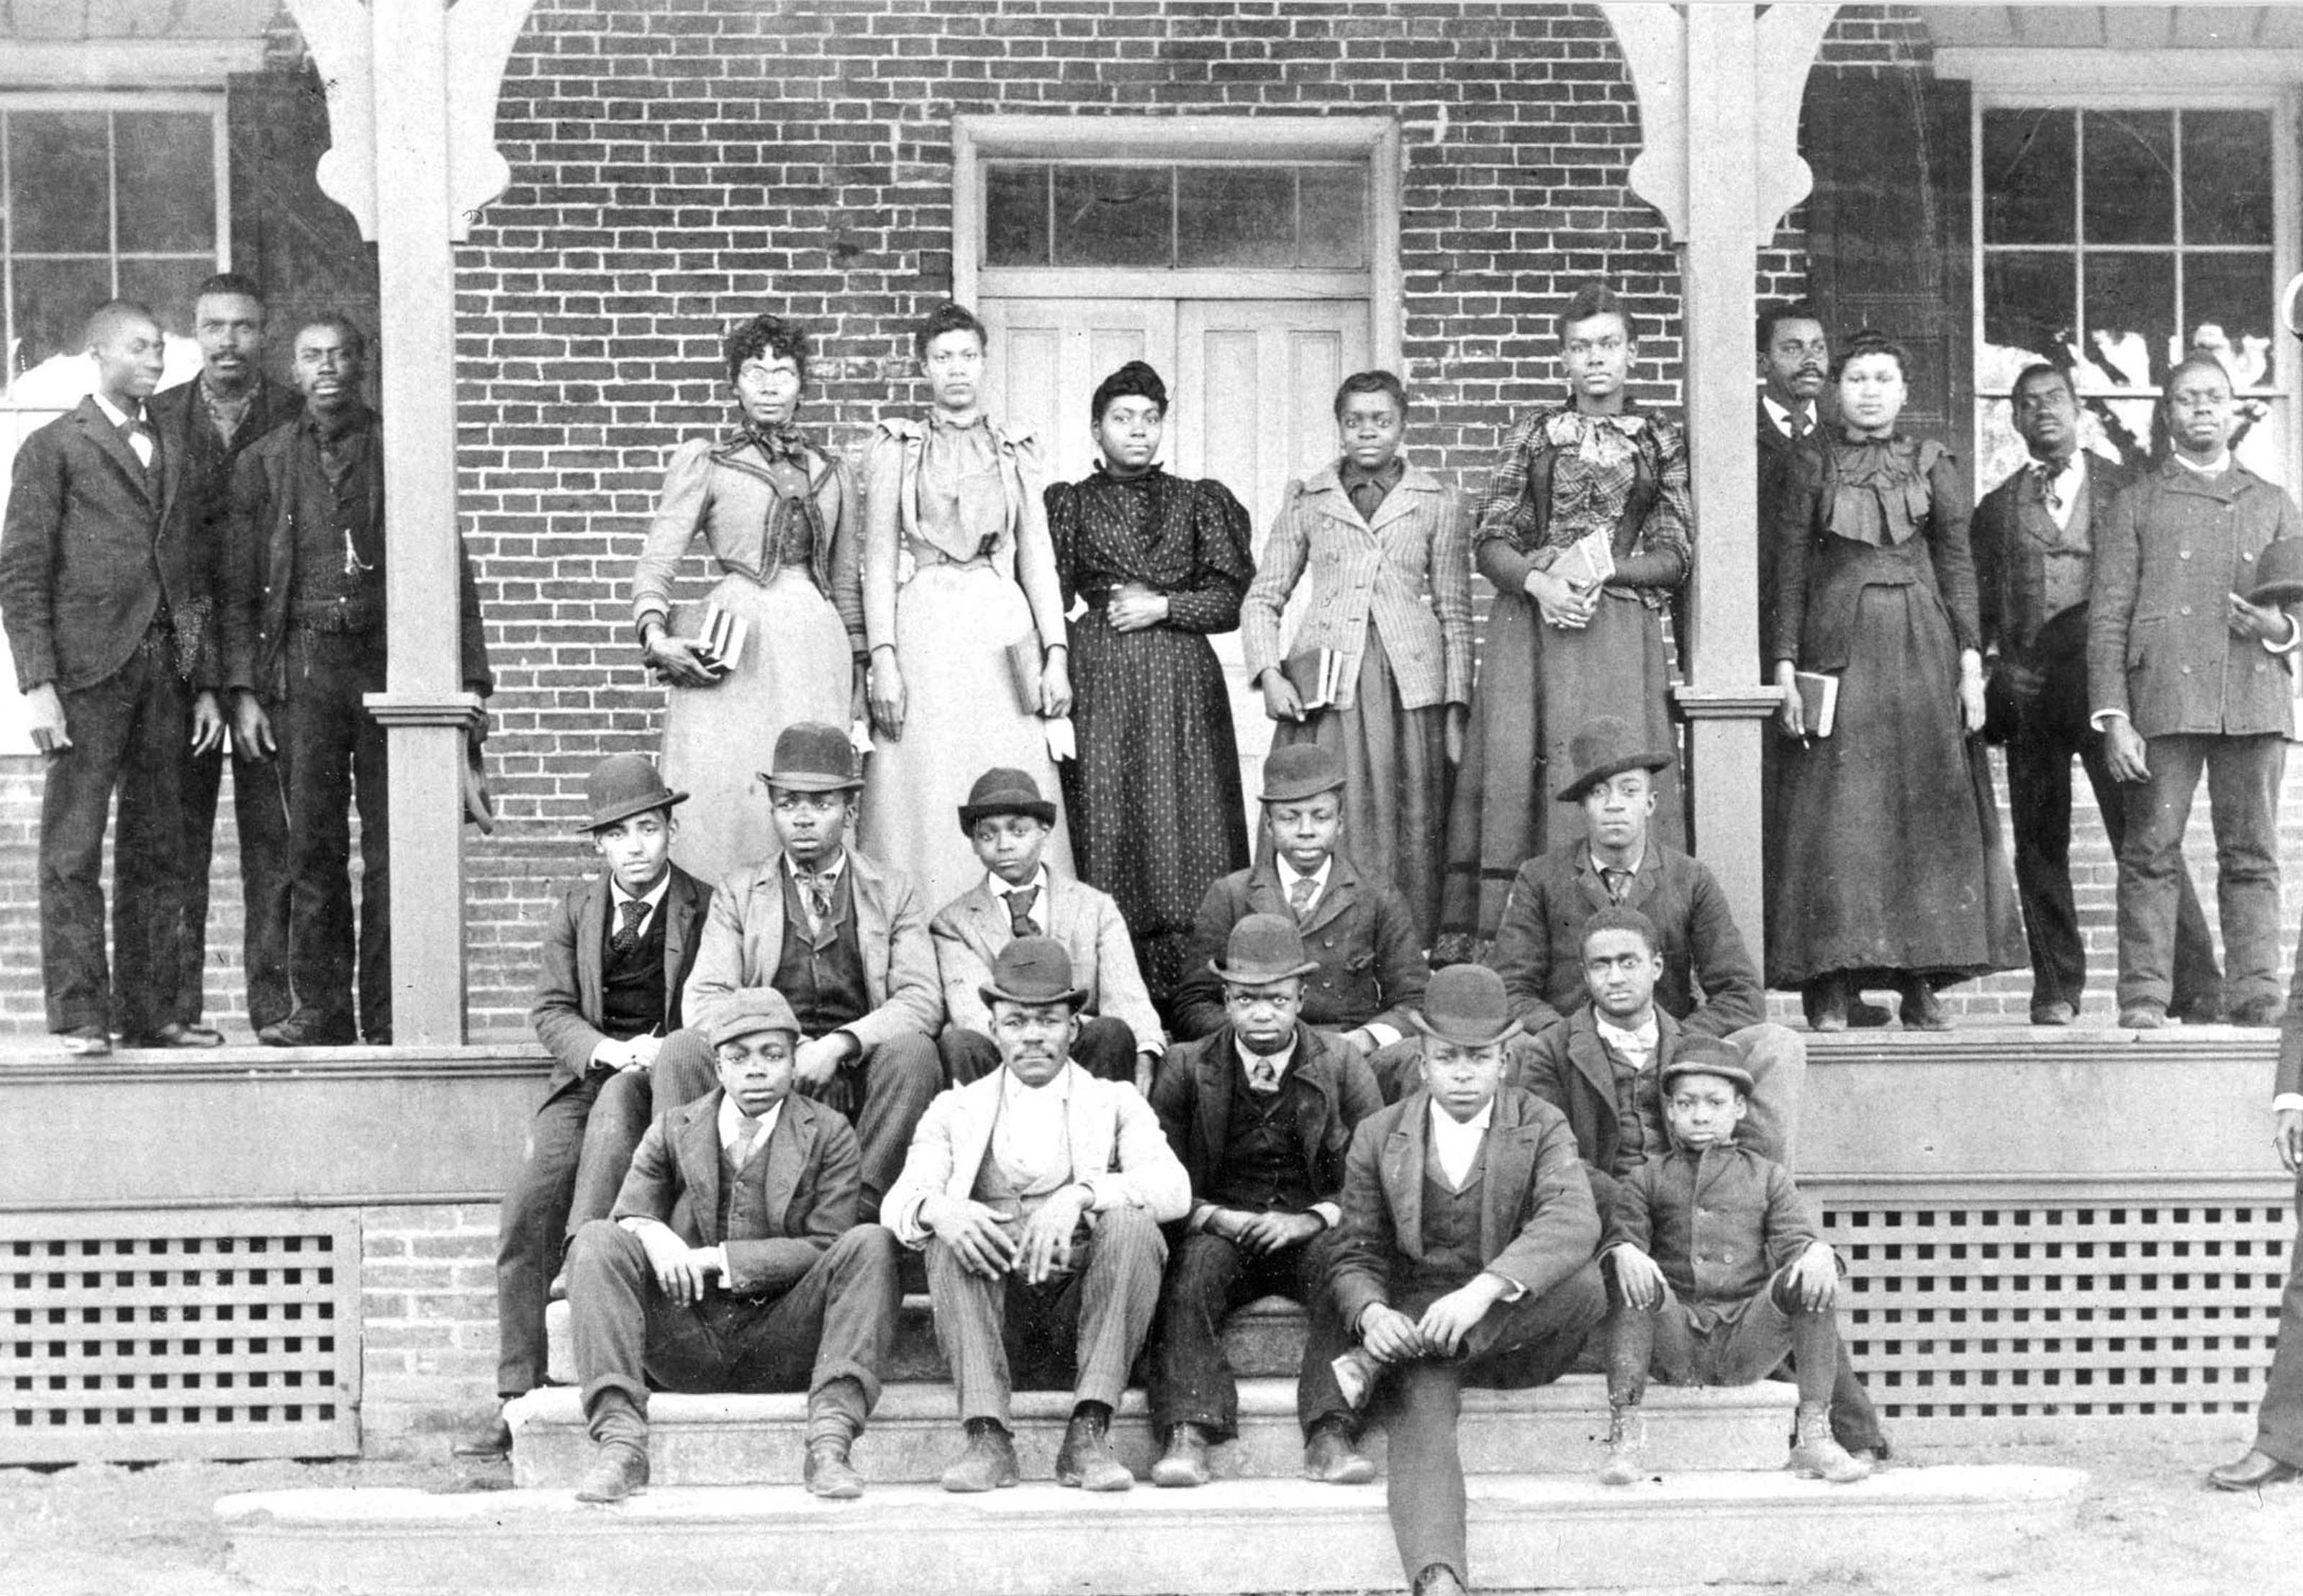 Delaware State University is looking toward the celebration of the institution's 130th anniversary on May 14-16, 2021 and has established a steering committee to begin the planning of the observance events. The picture is the earliest surviving photo of a class from the then-State College for Colored Students in the late 1890s.